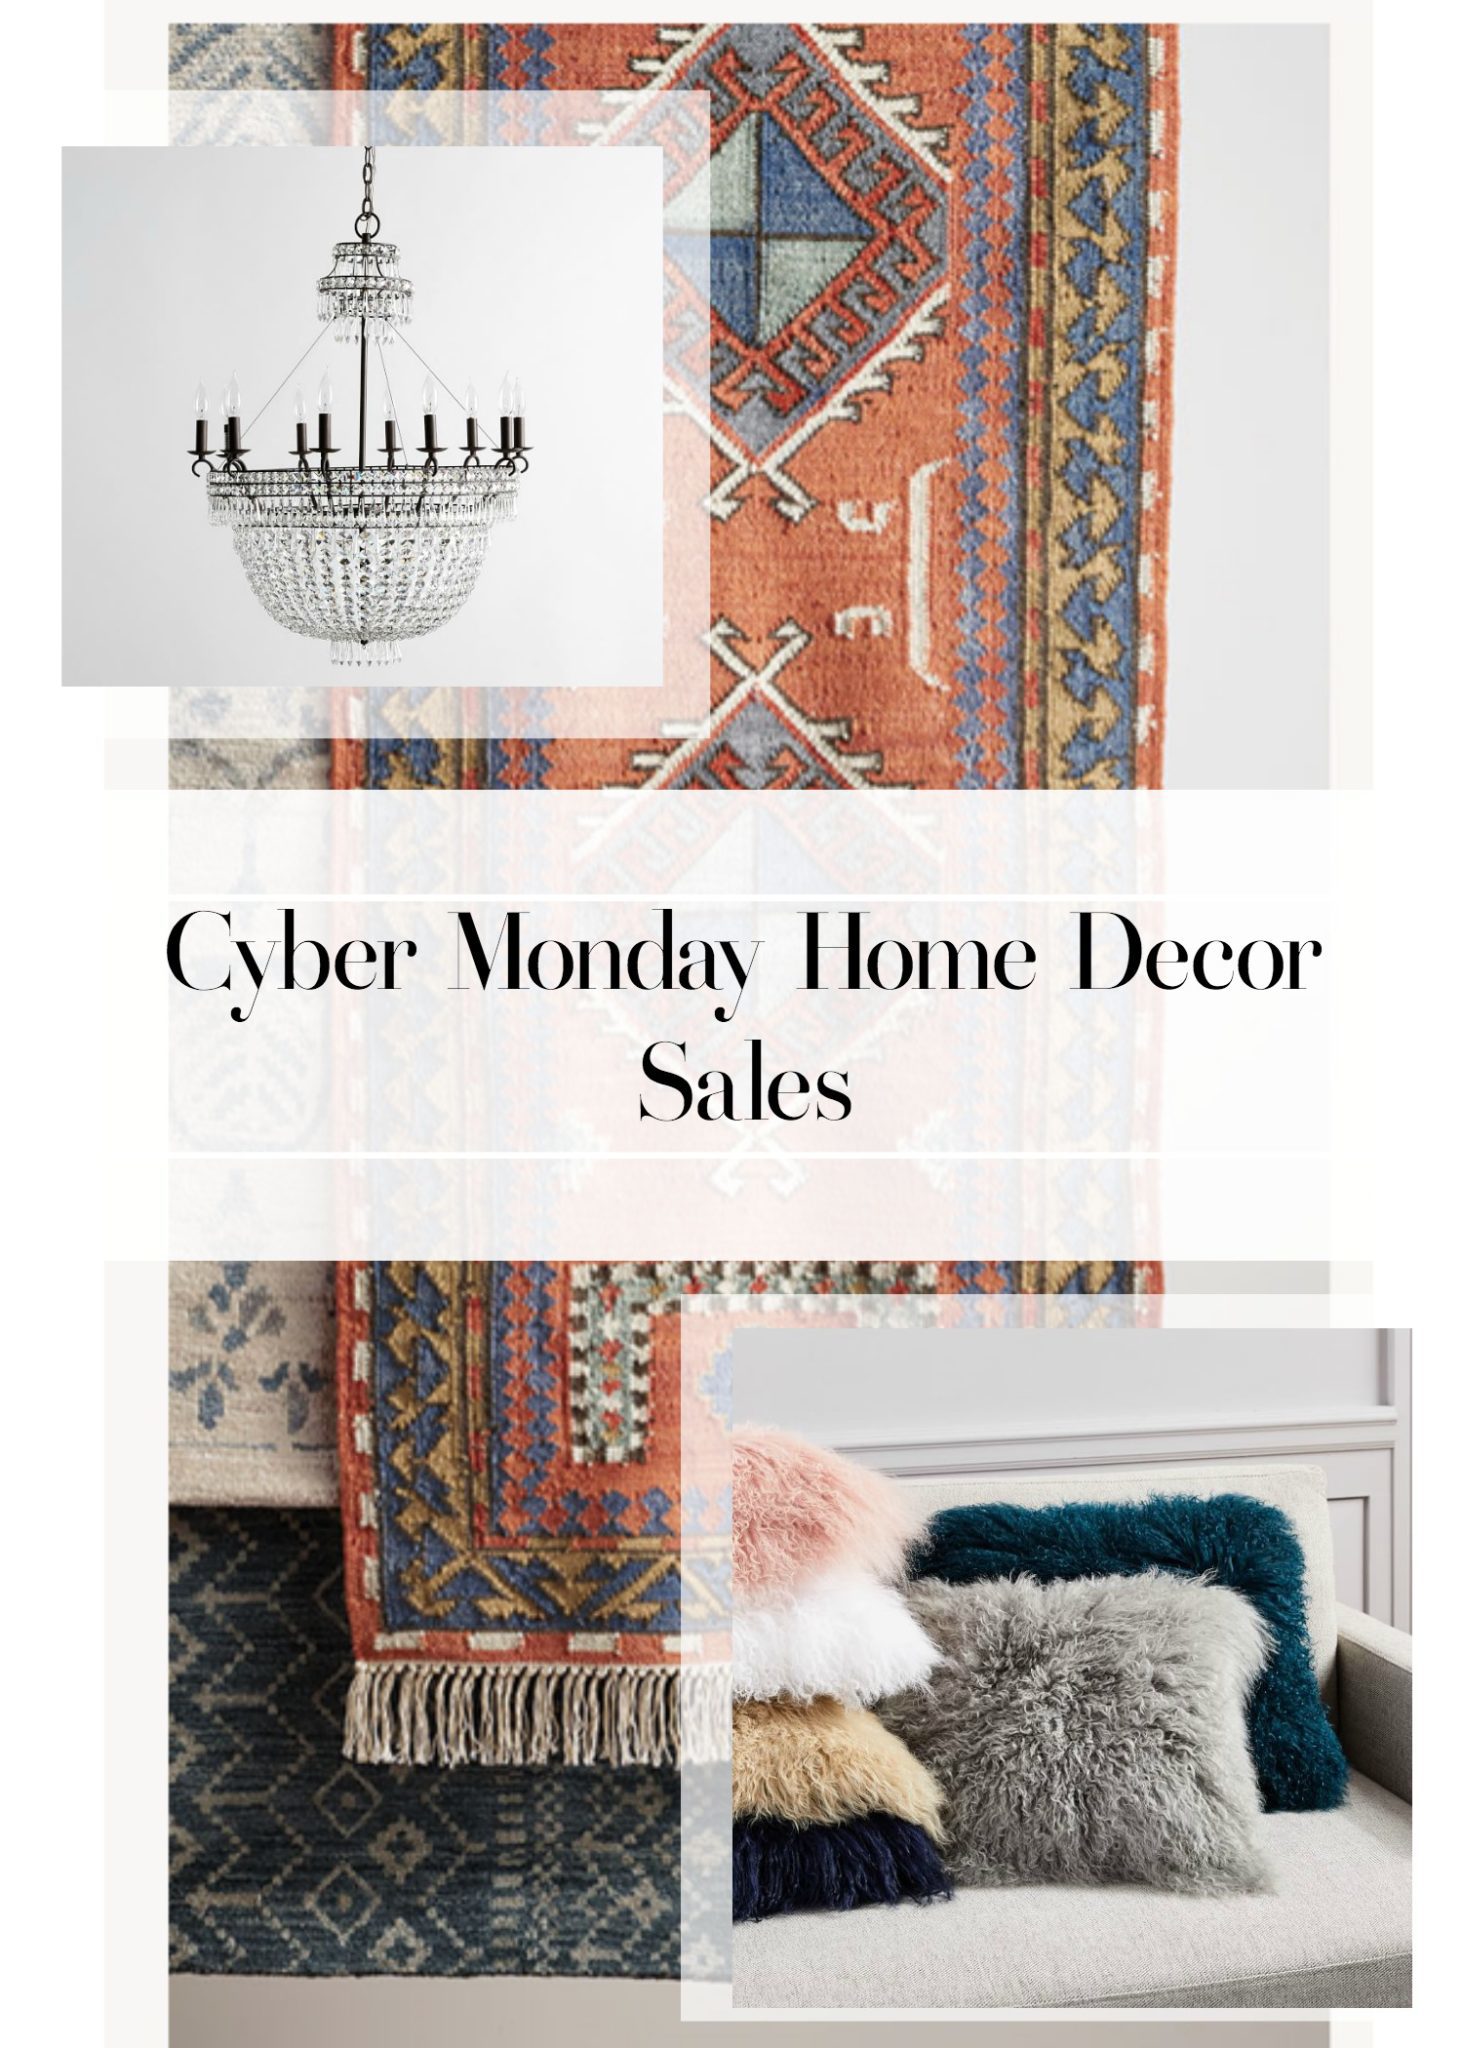 CYBER MONDAY SALES: The Best in Home Sales